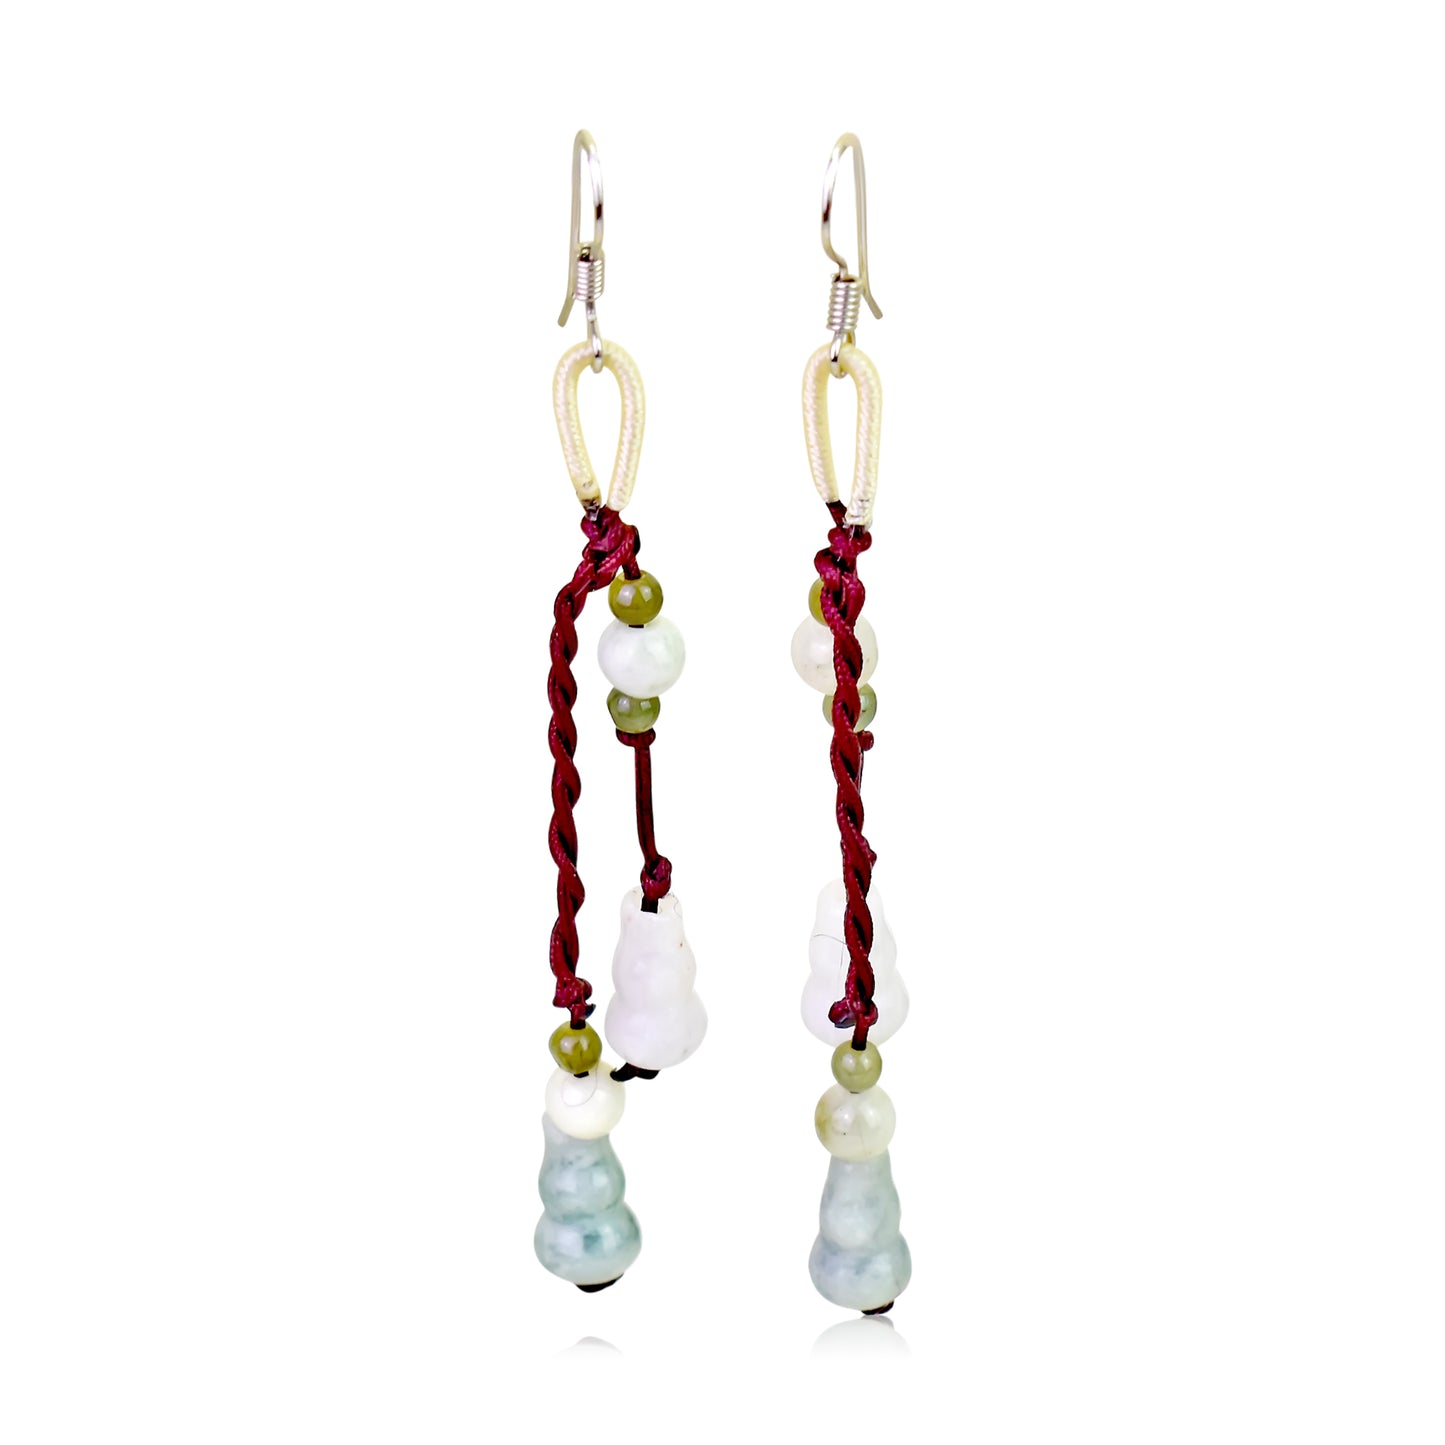 Make Magic with Fairy Vase Handmade Jade Earrings made with Brown Cord